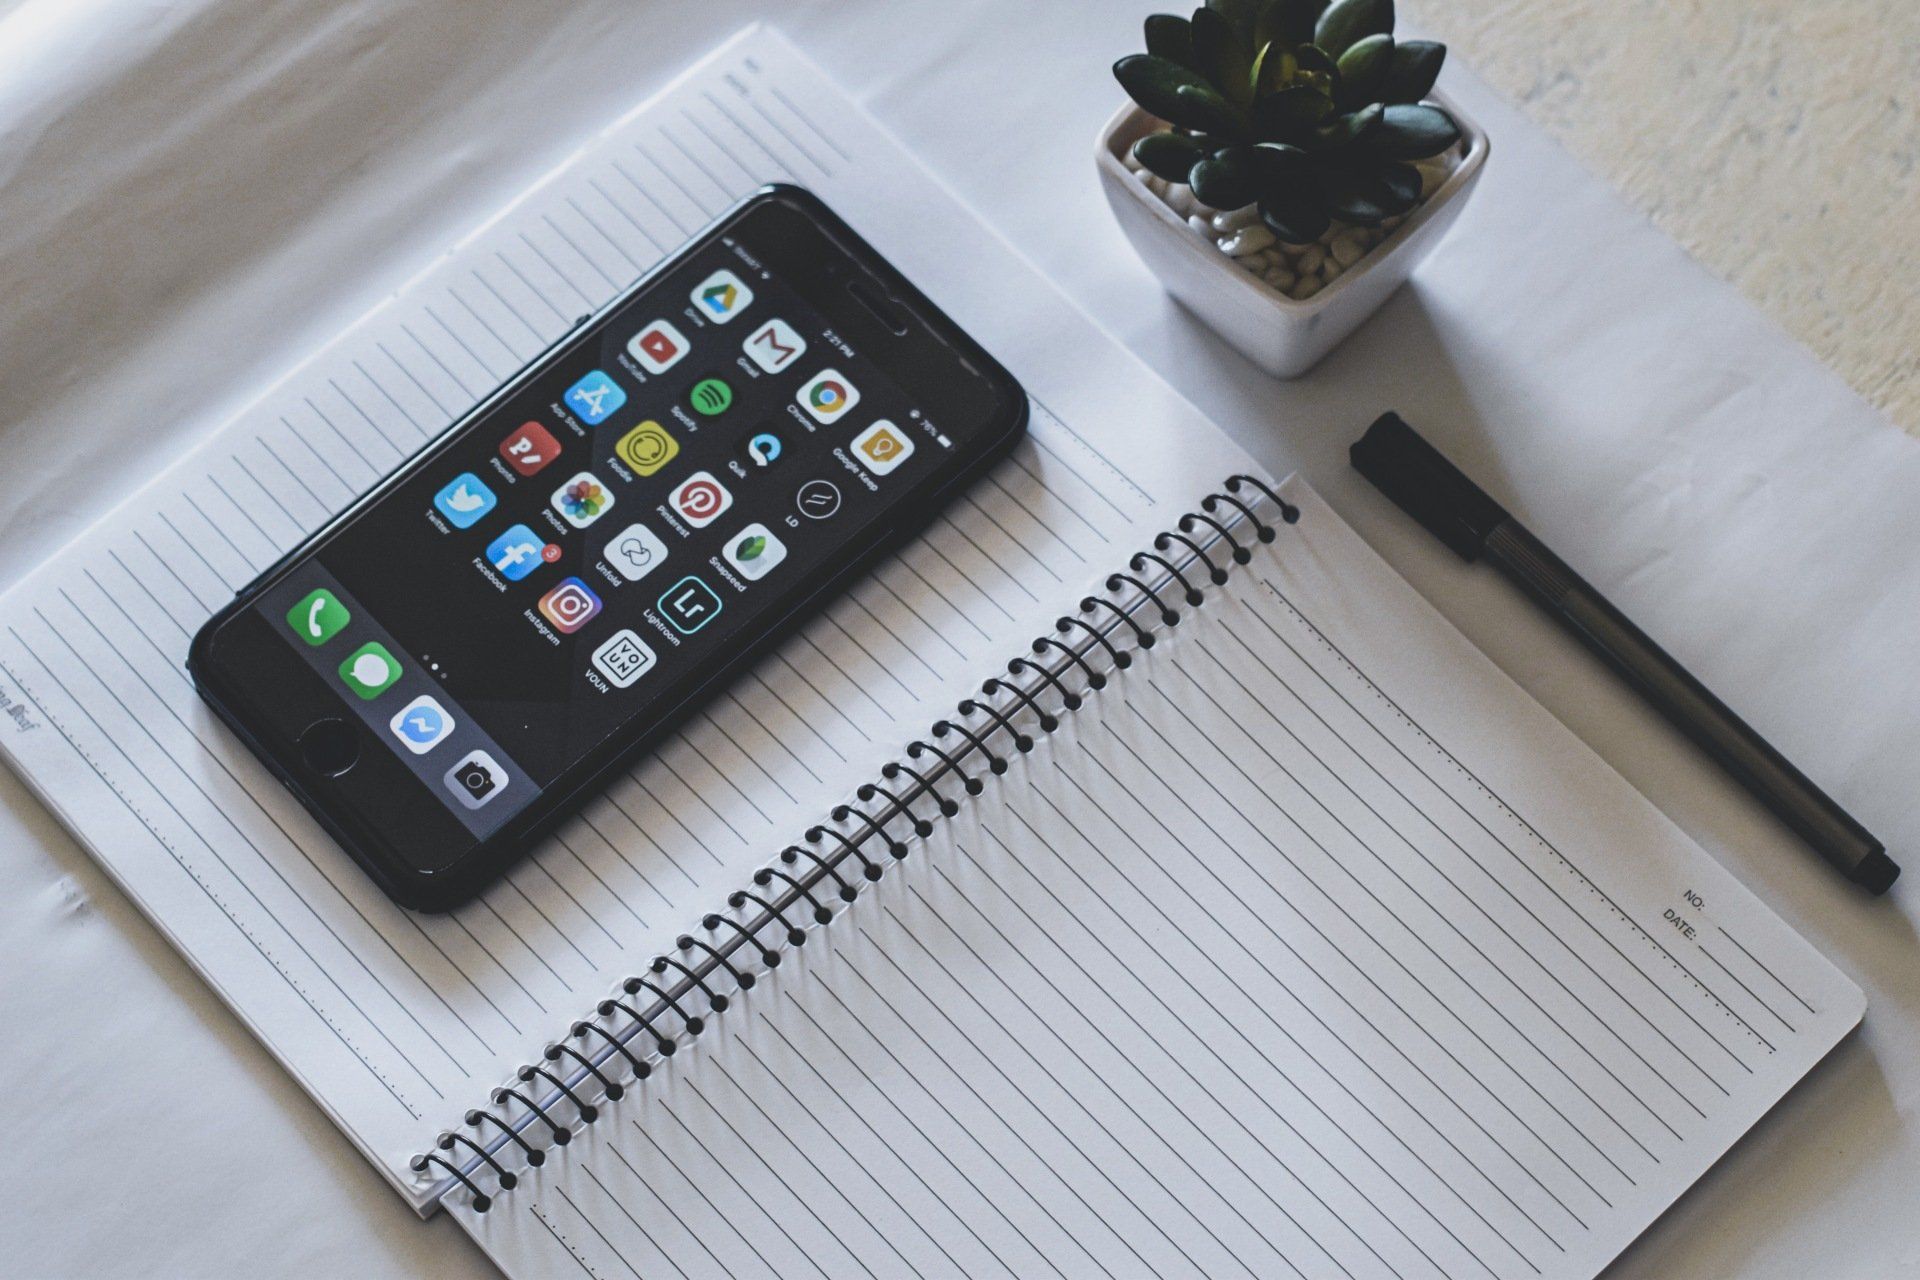 A cell phone is sitting on top of a notebook next to a pen and a potted plant.